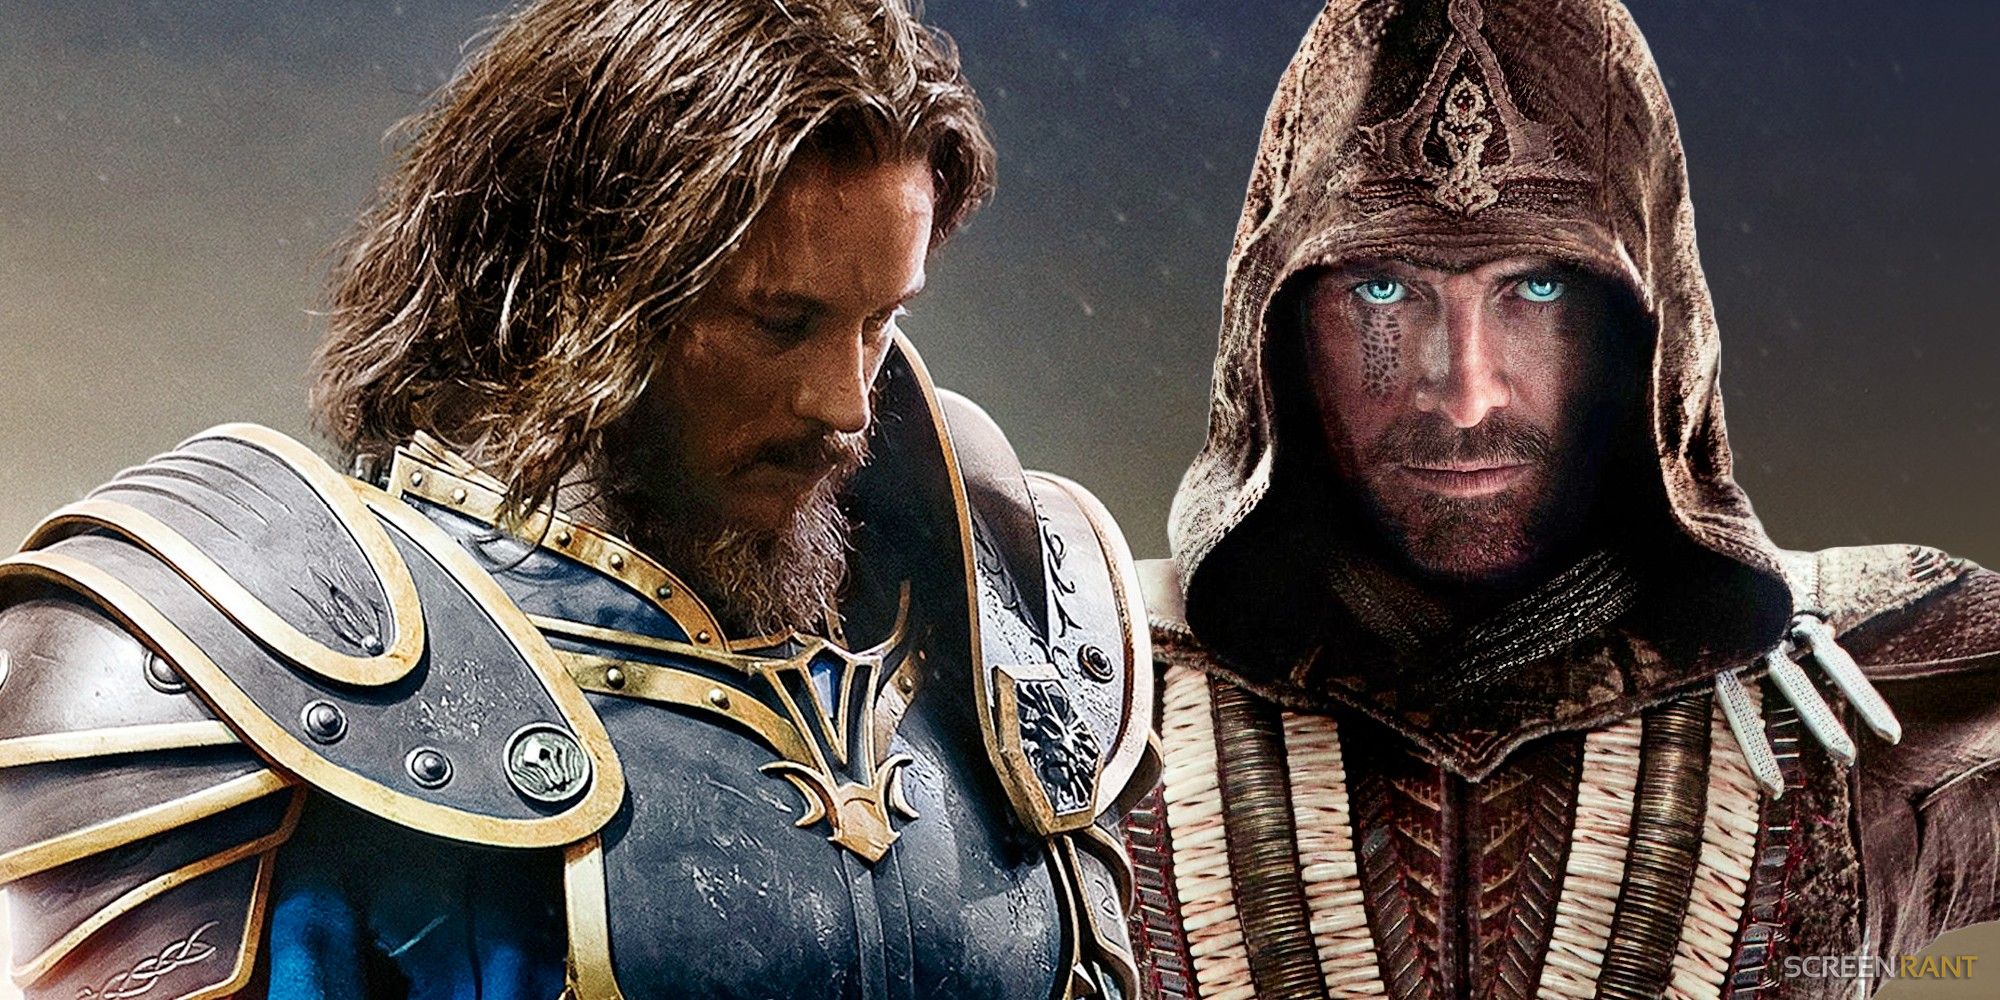 Travis Fimmel in Warcraft and Michael Fassbender in Assassin's Creed